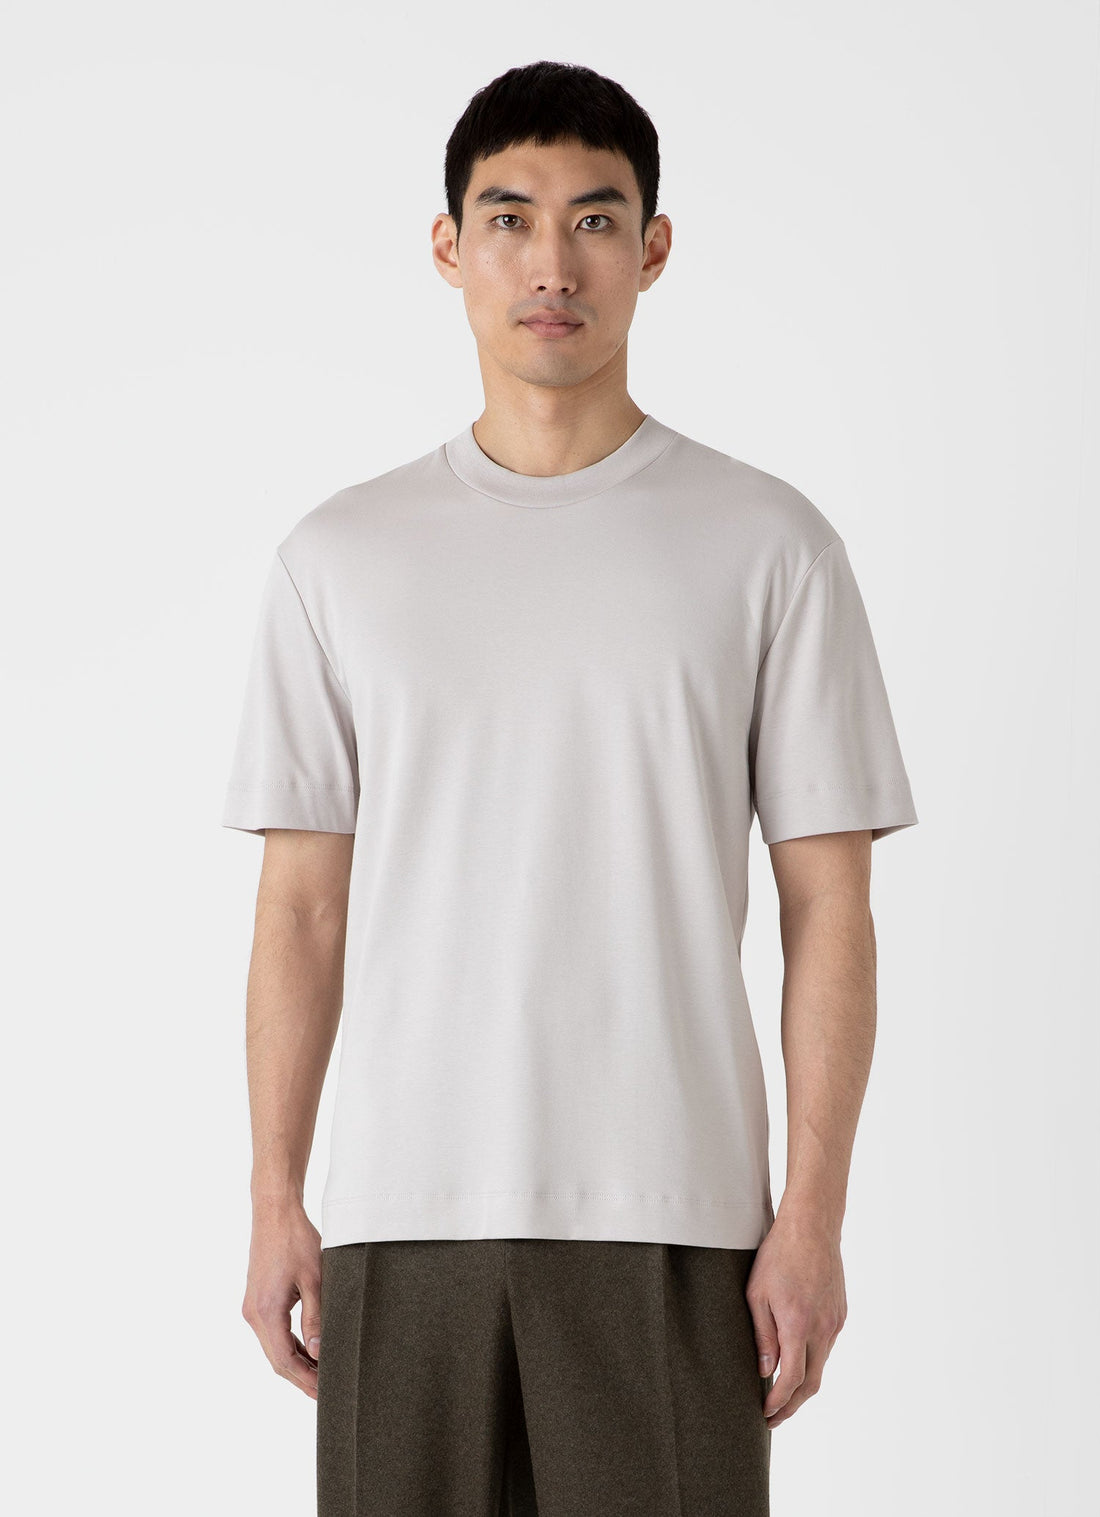 Men's Relaxed Fit Heavyweight T-shirt in Putty